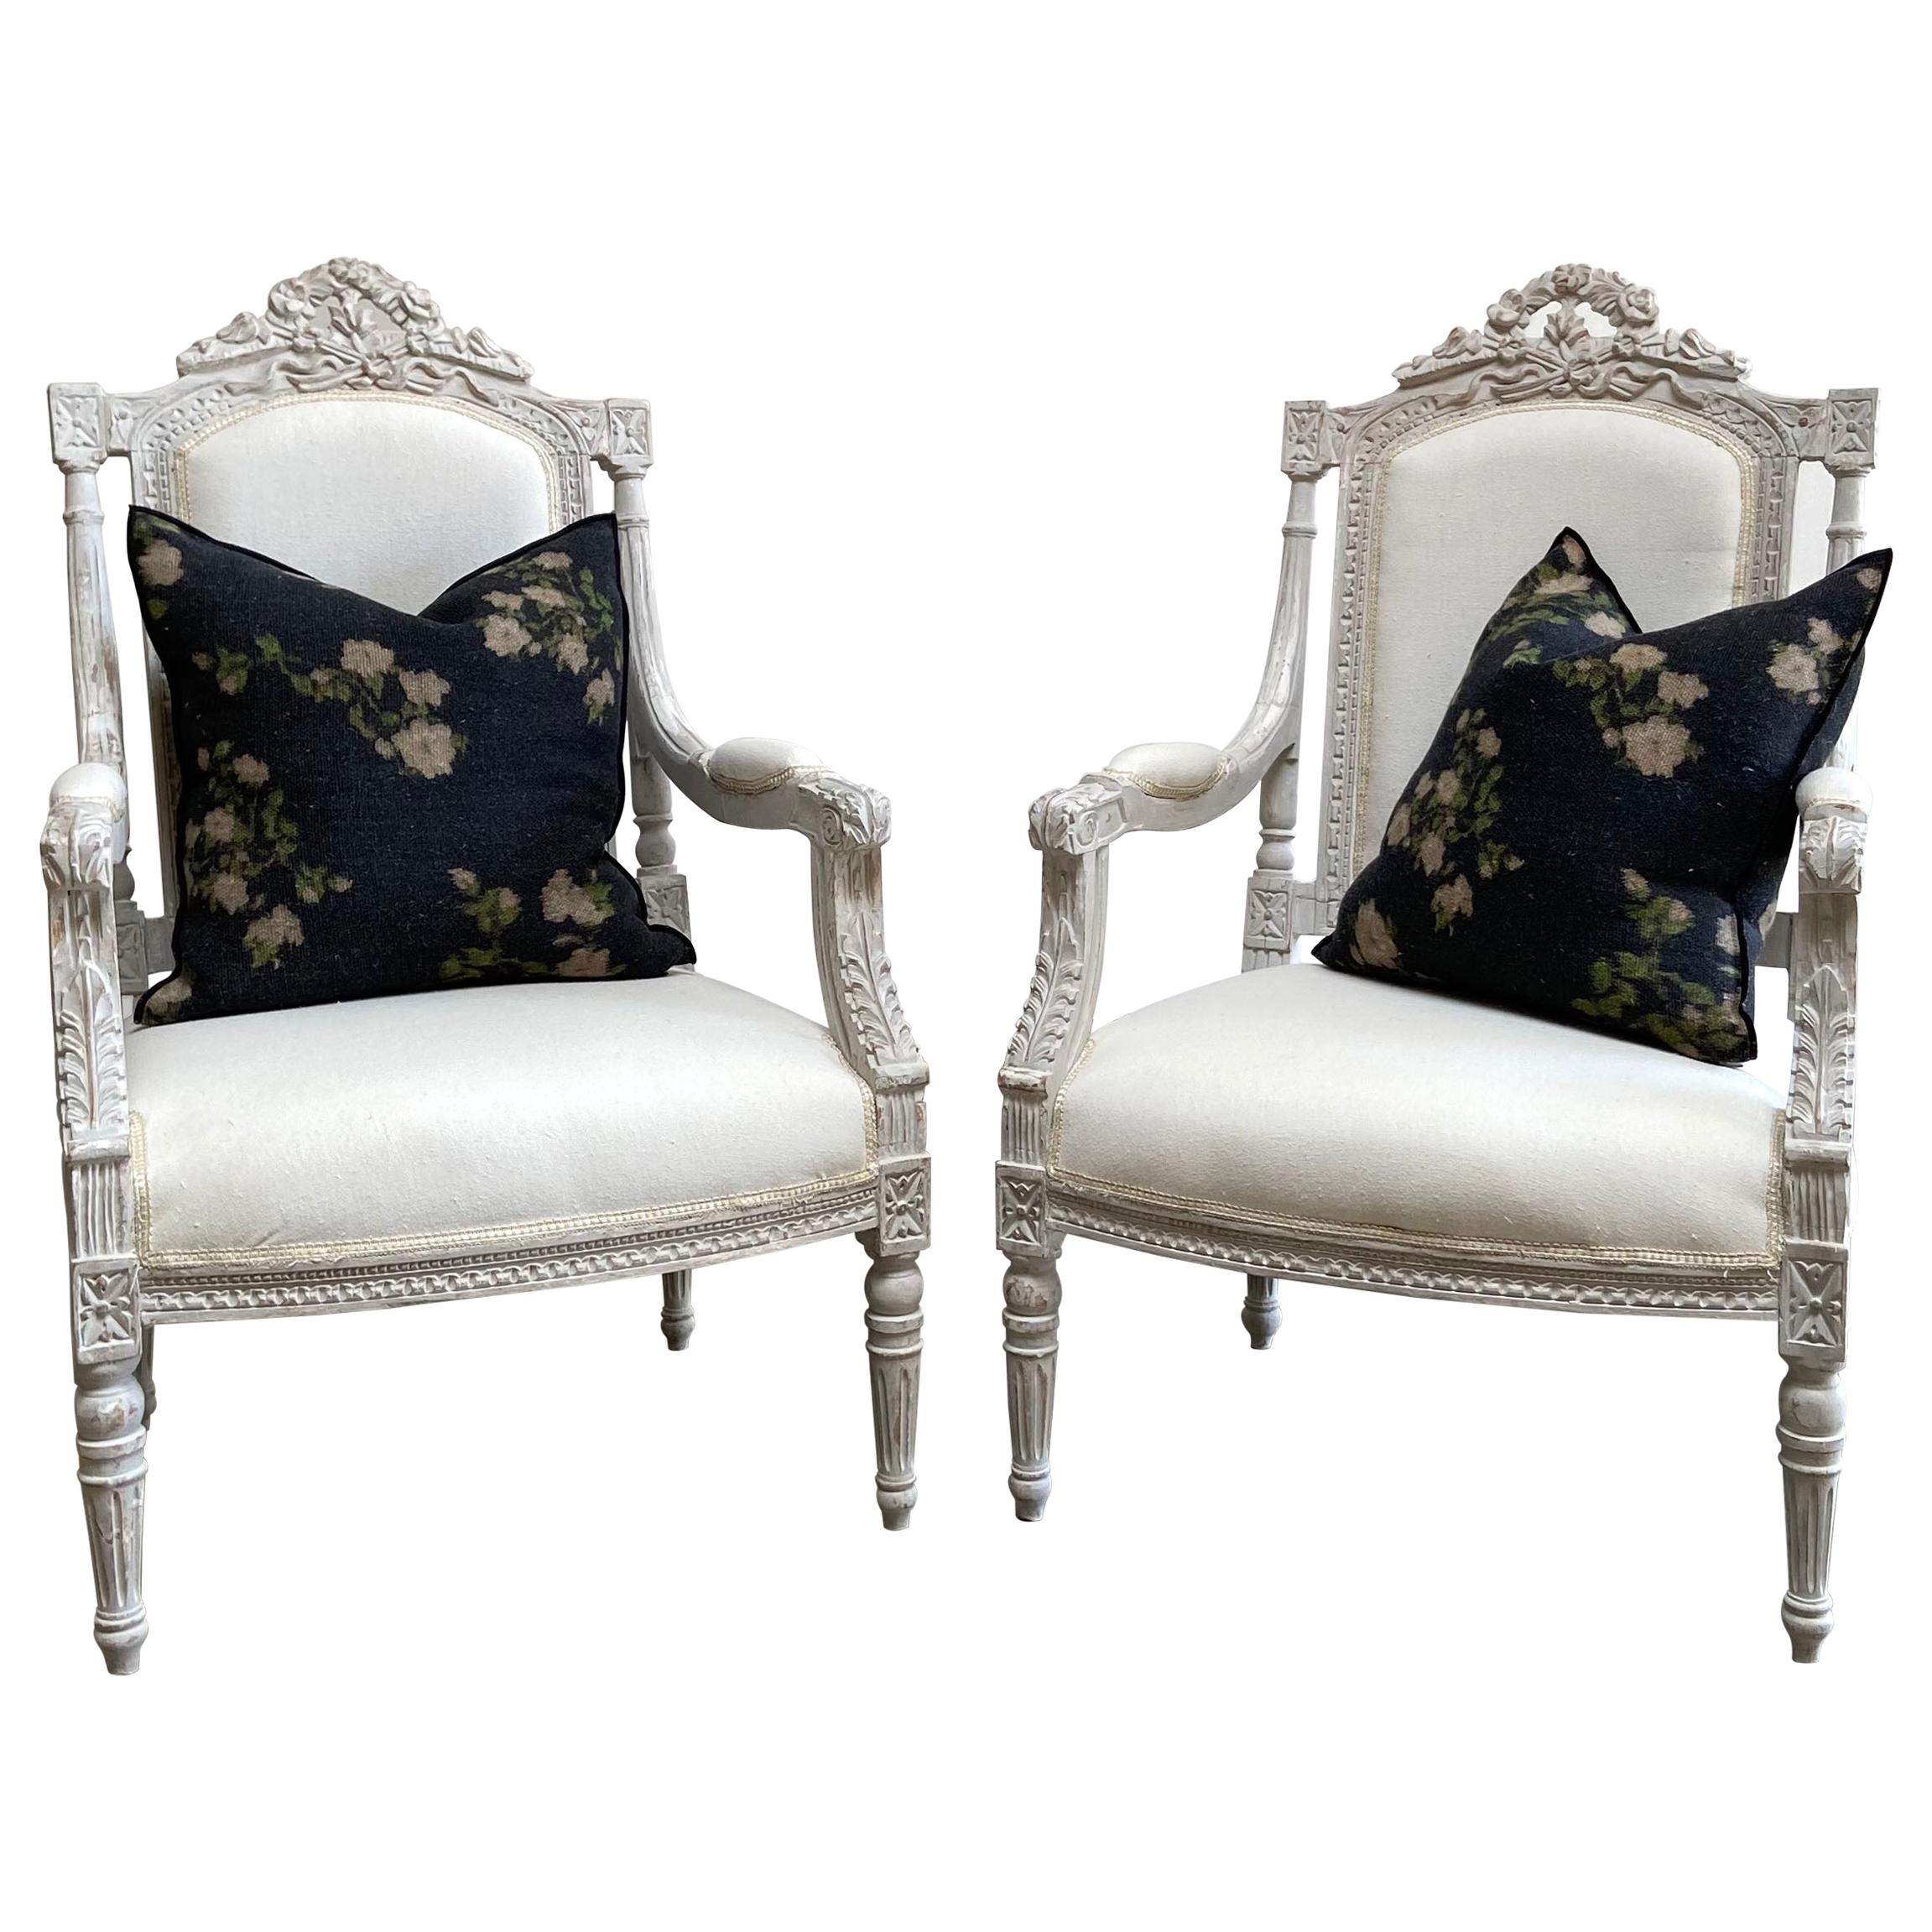 Vintage Pair of Painted and Upholstered Louis XVI Style Carved Chairs